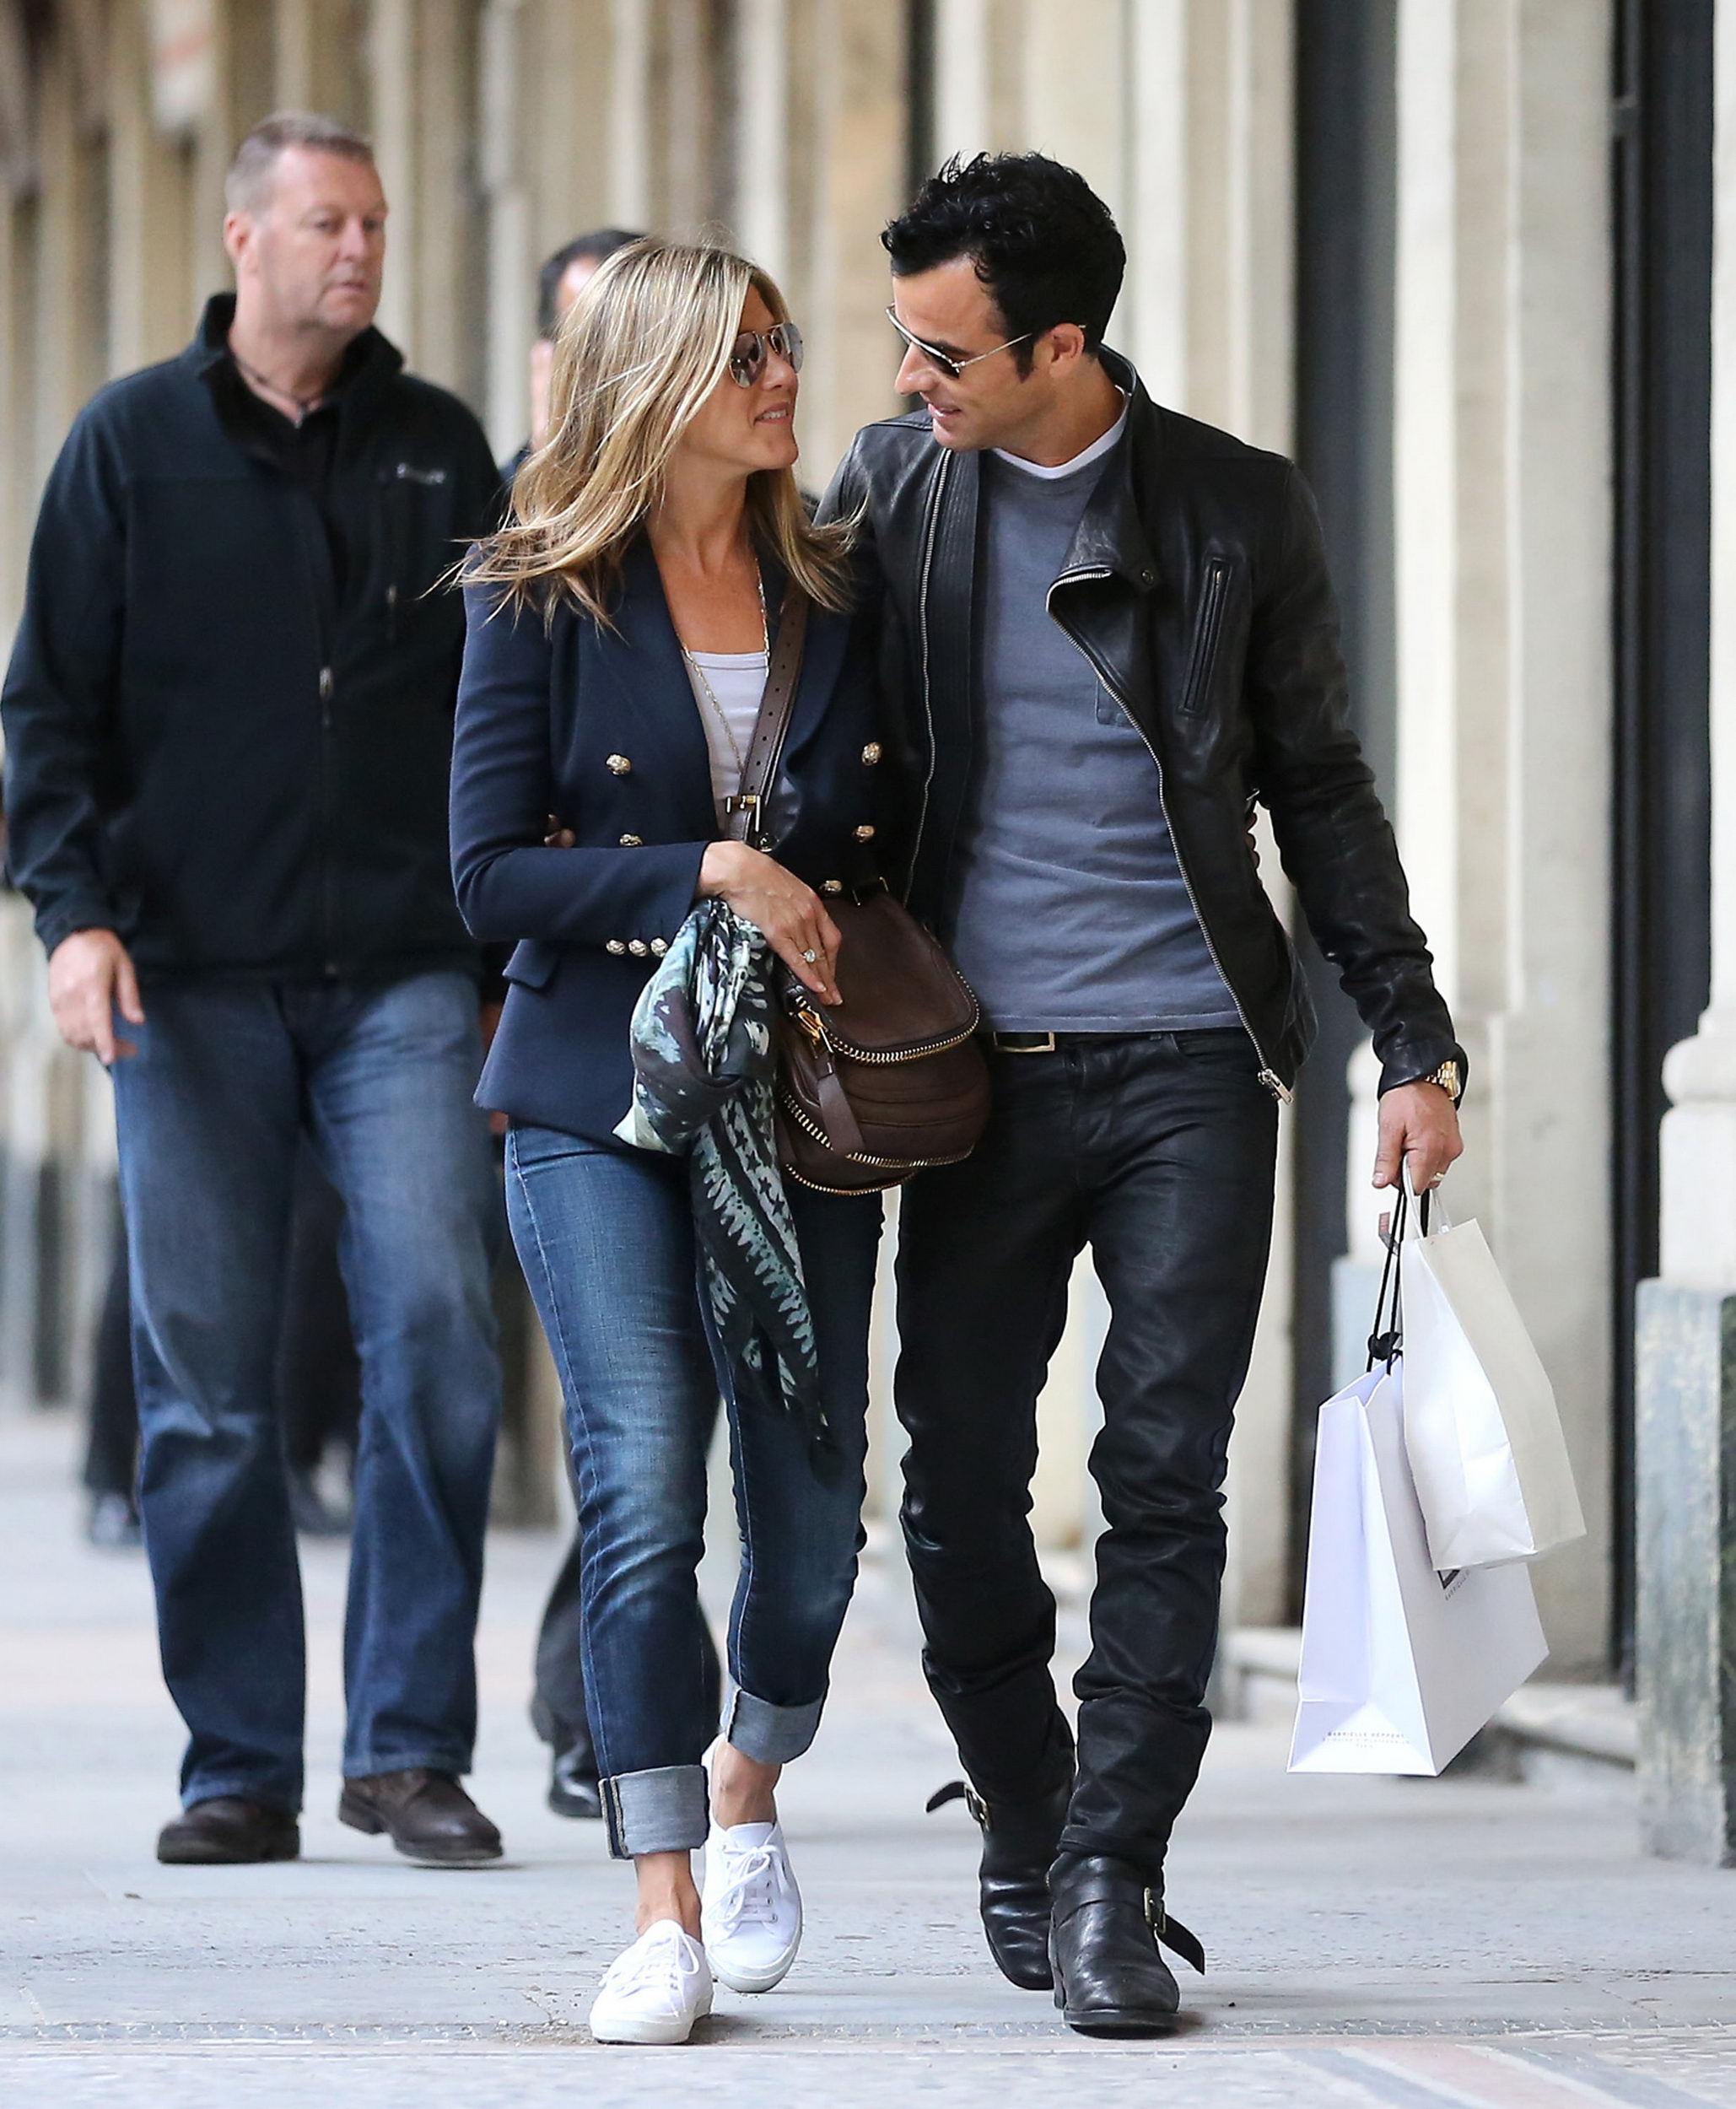 Jennifer Aniston and Justin Theroux are seen O&A @ Paris - 11/06/12. 